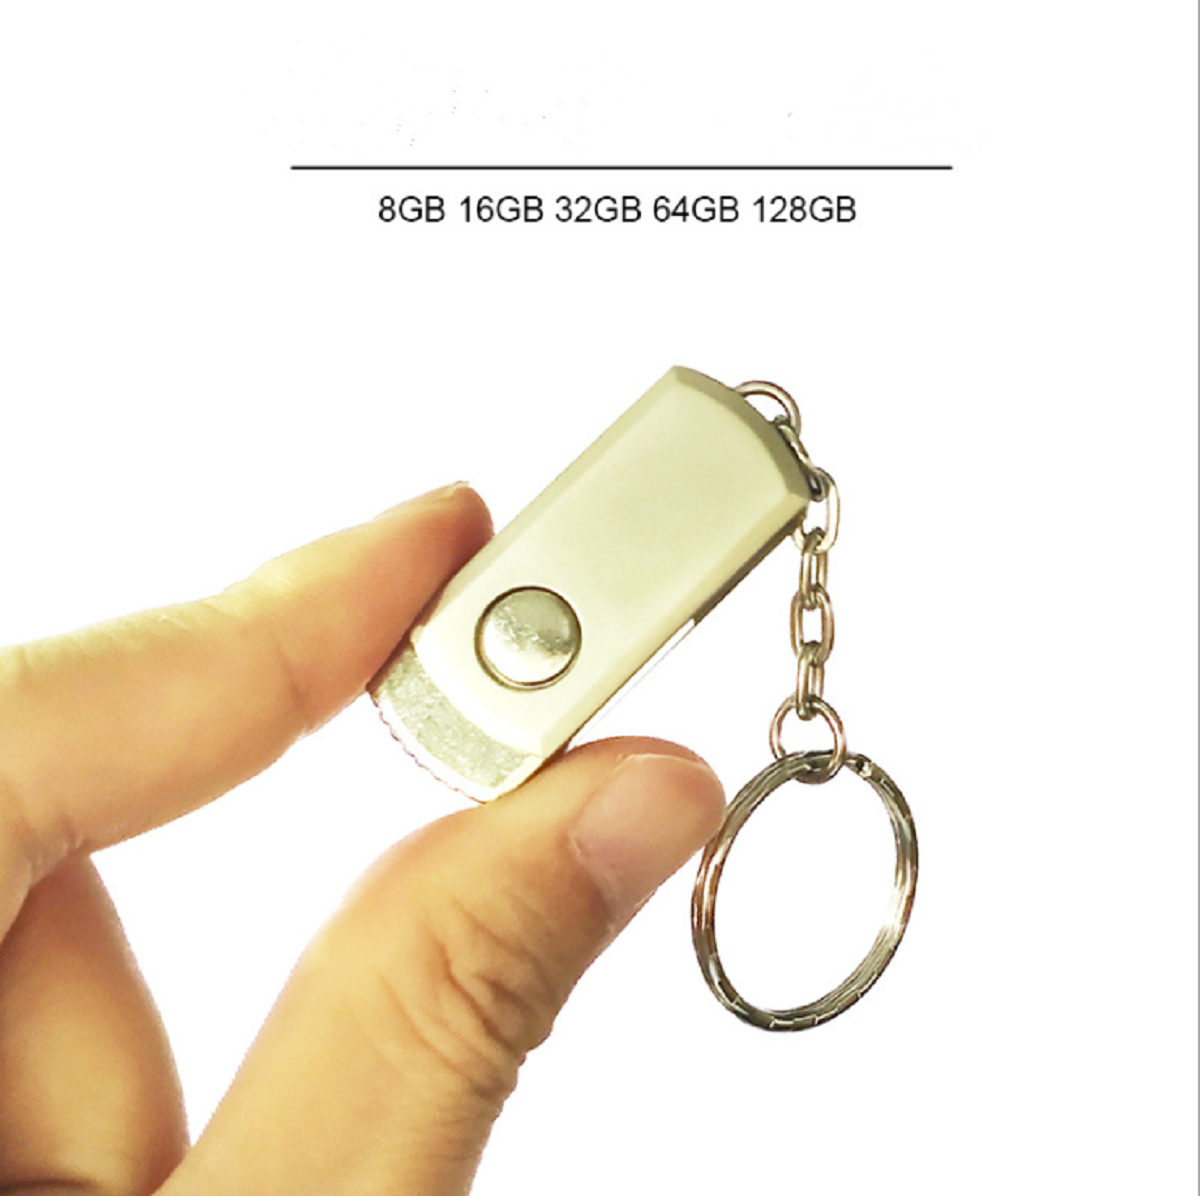 3.0 high speed office business USB flash disk 128G lettering 7